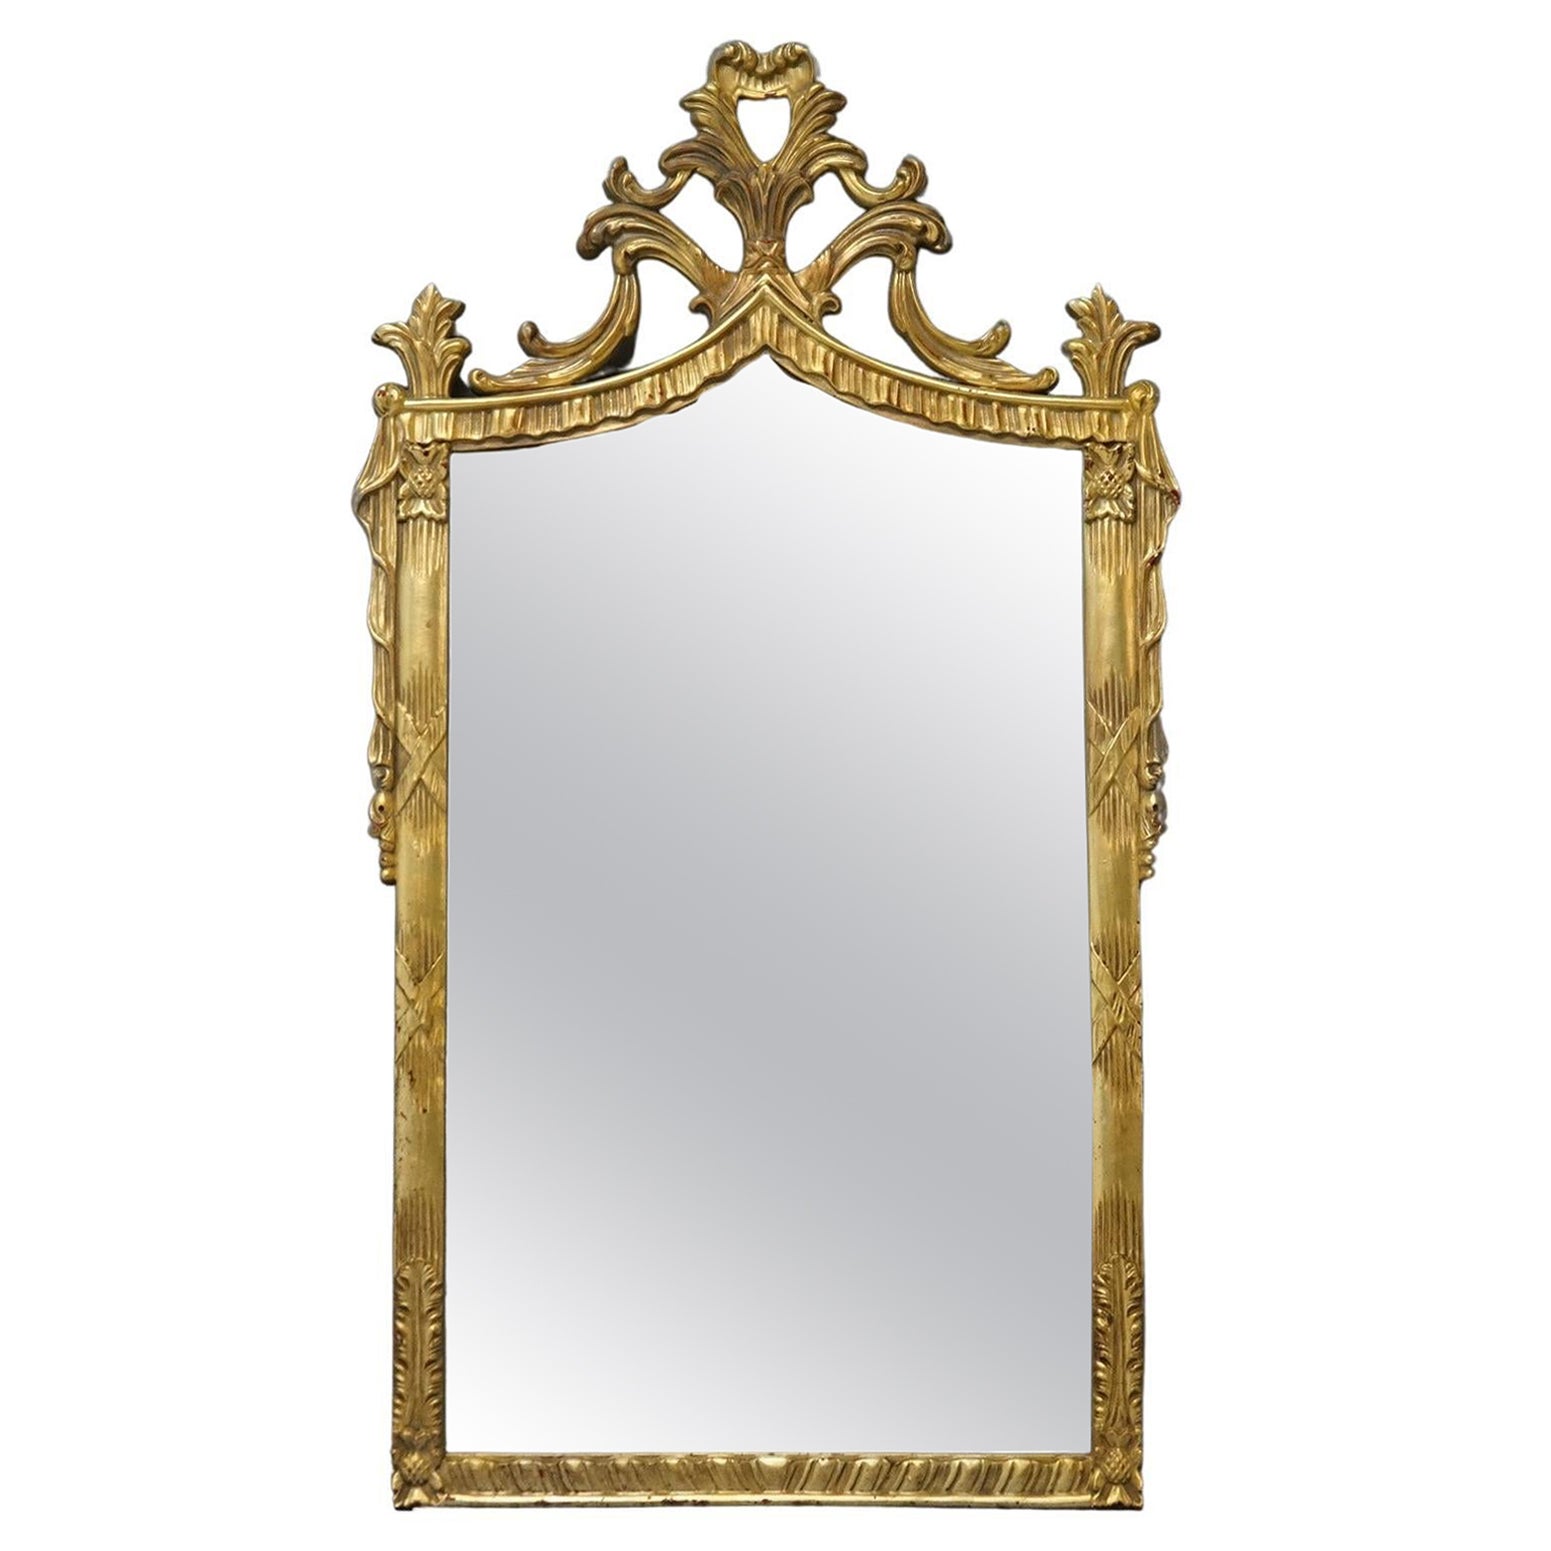 French Louis XIV Style Giltwood Wall Mirror 20th C